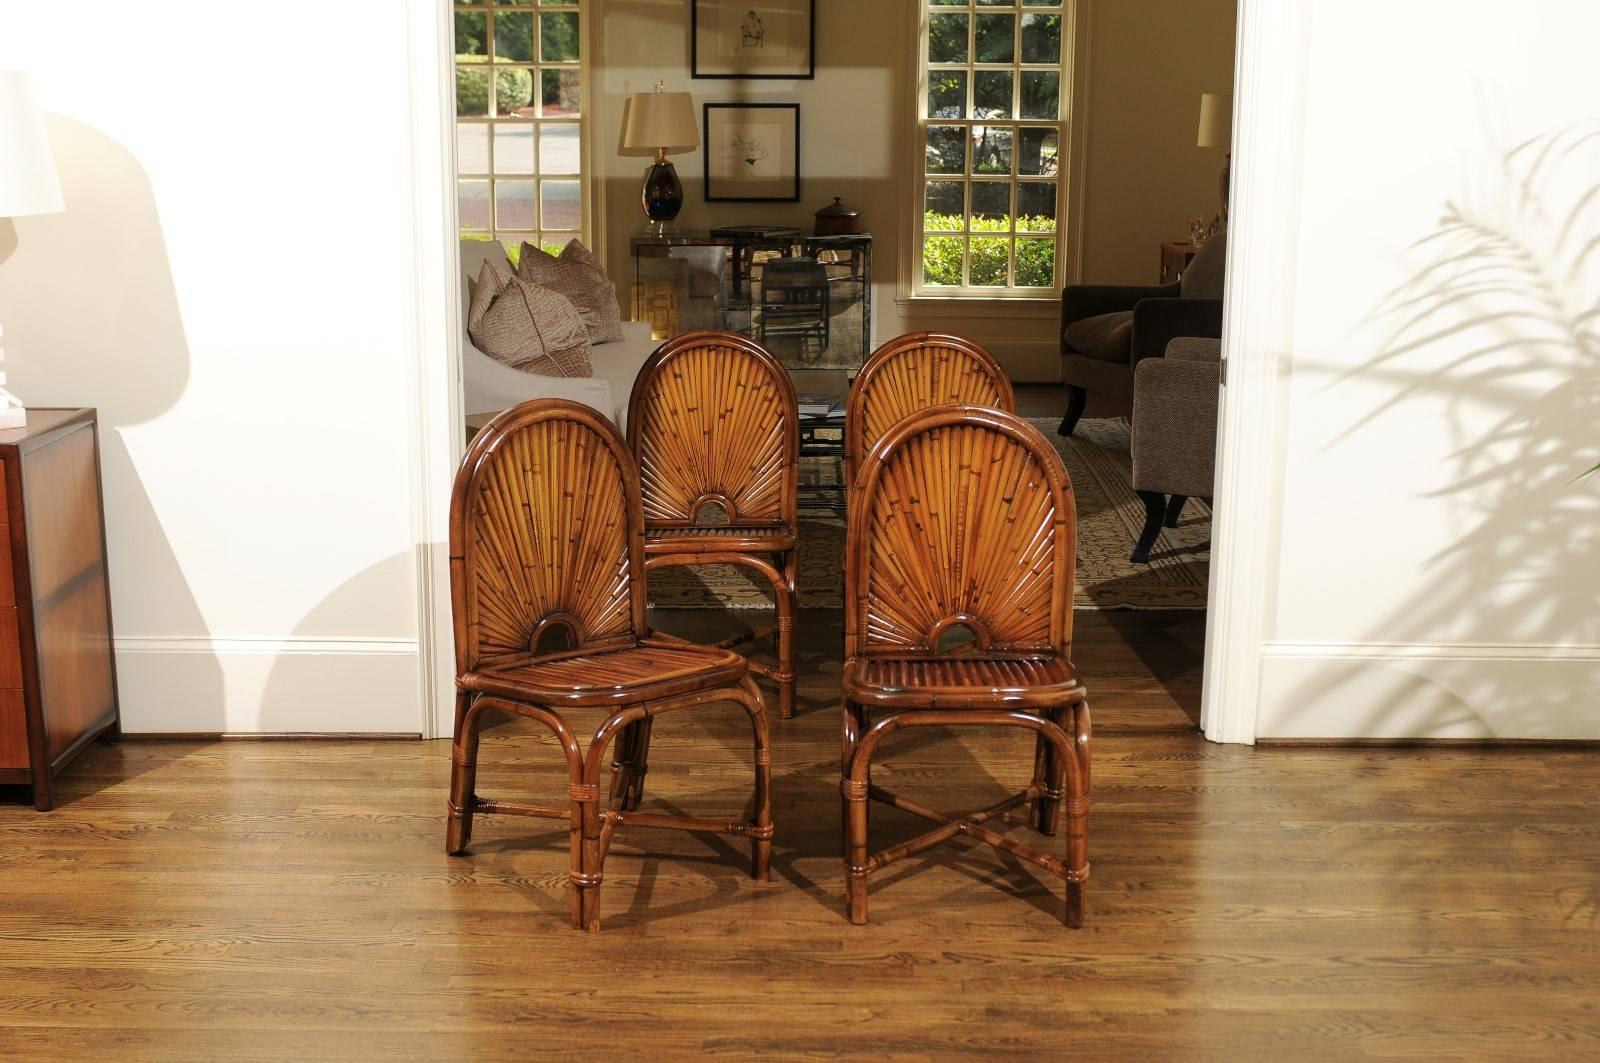 These magnificent dining chairs are shipped as professionally photographed and described in the listing narrative: Meticulously professionally restored and installation ready. Expert custom upholstery service is available.

An incredible restored